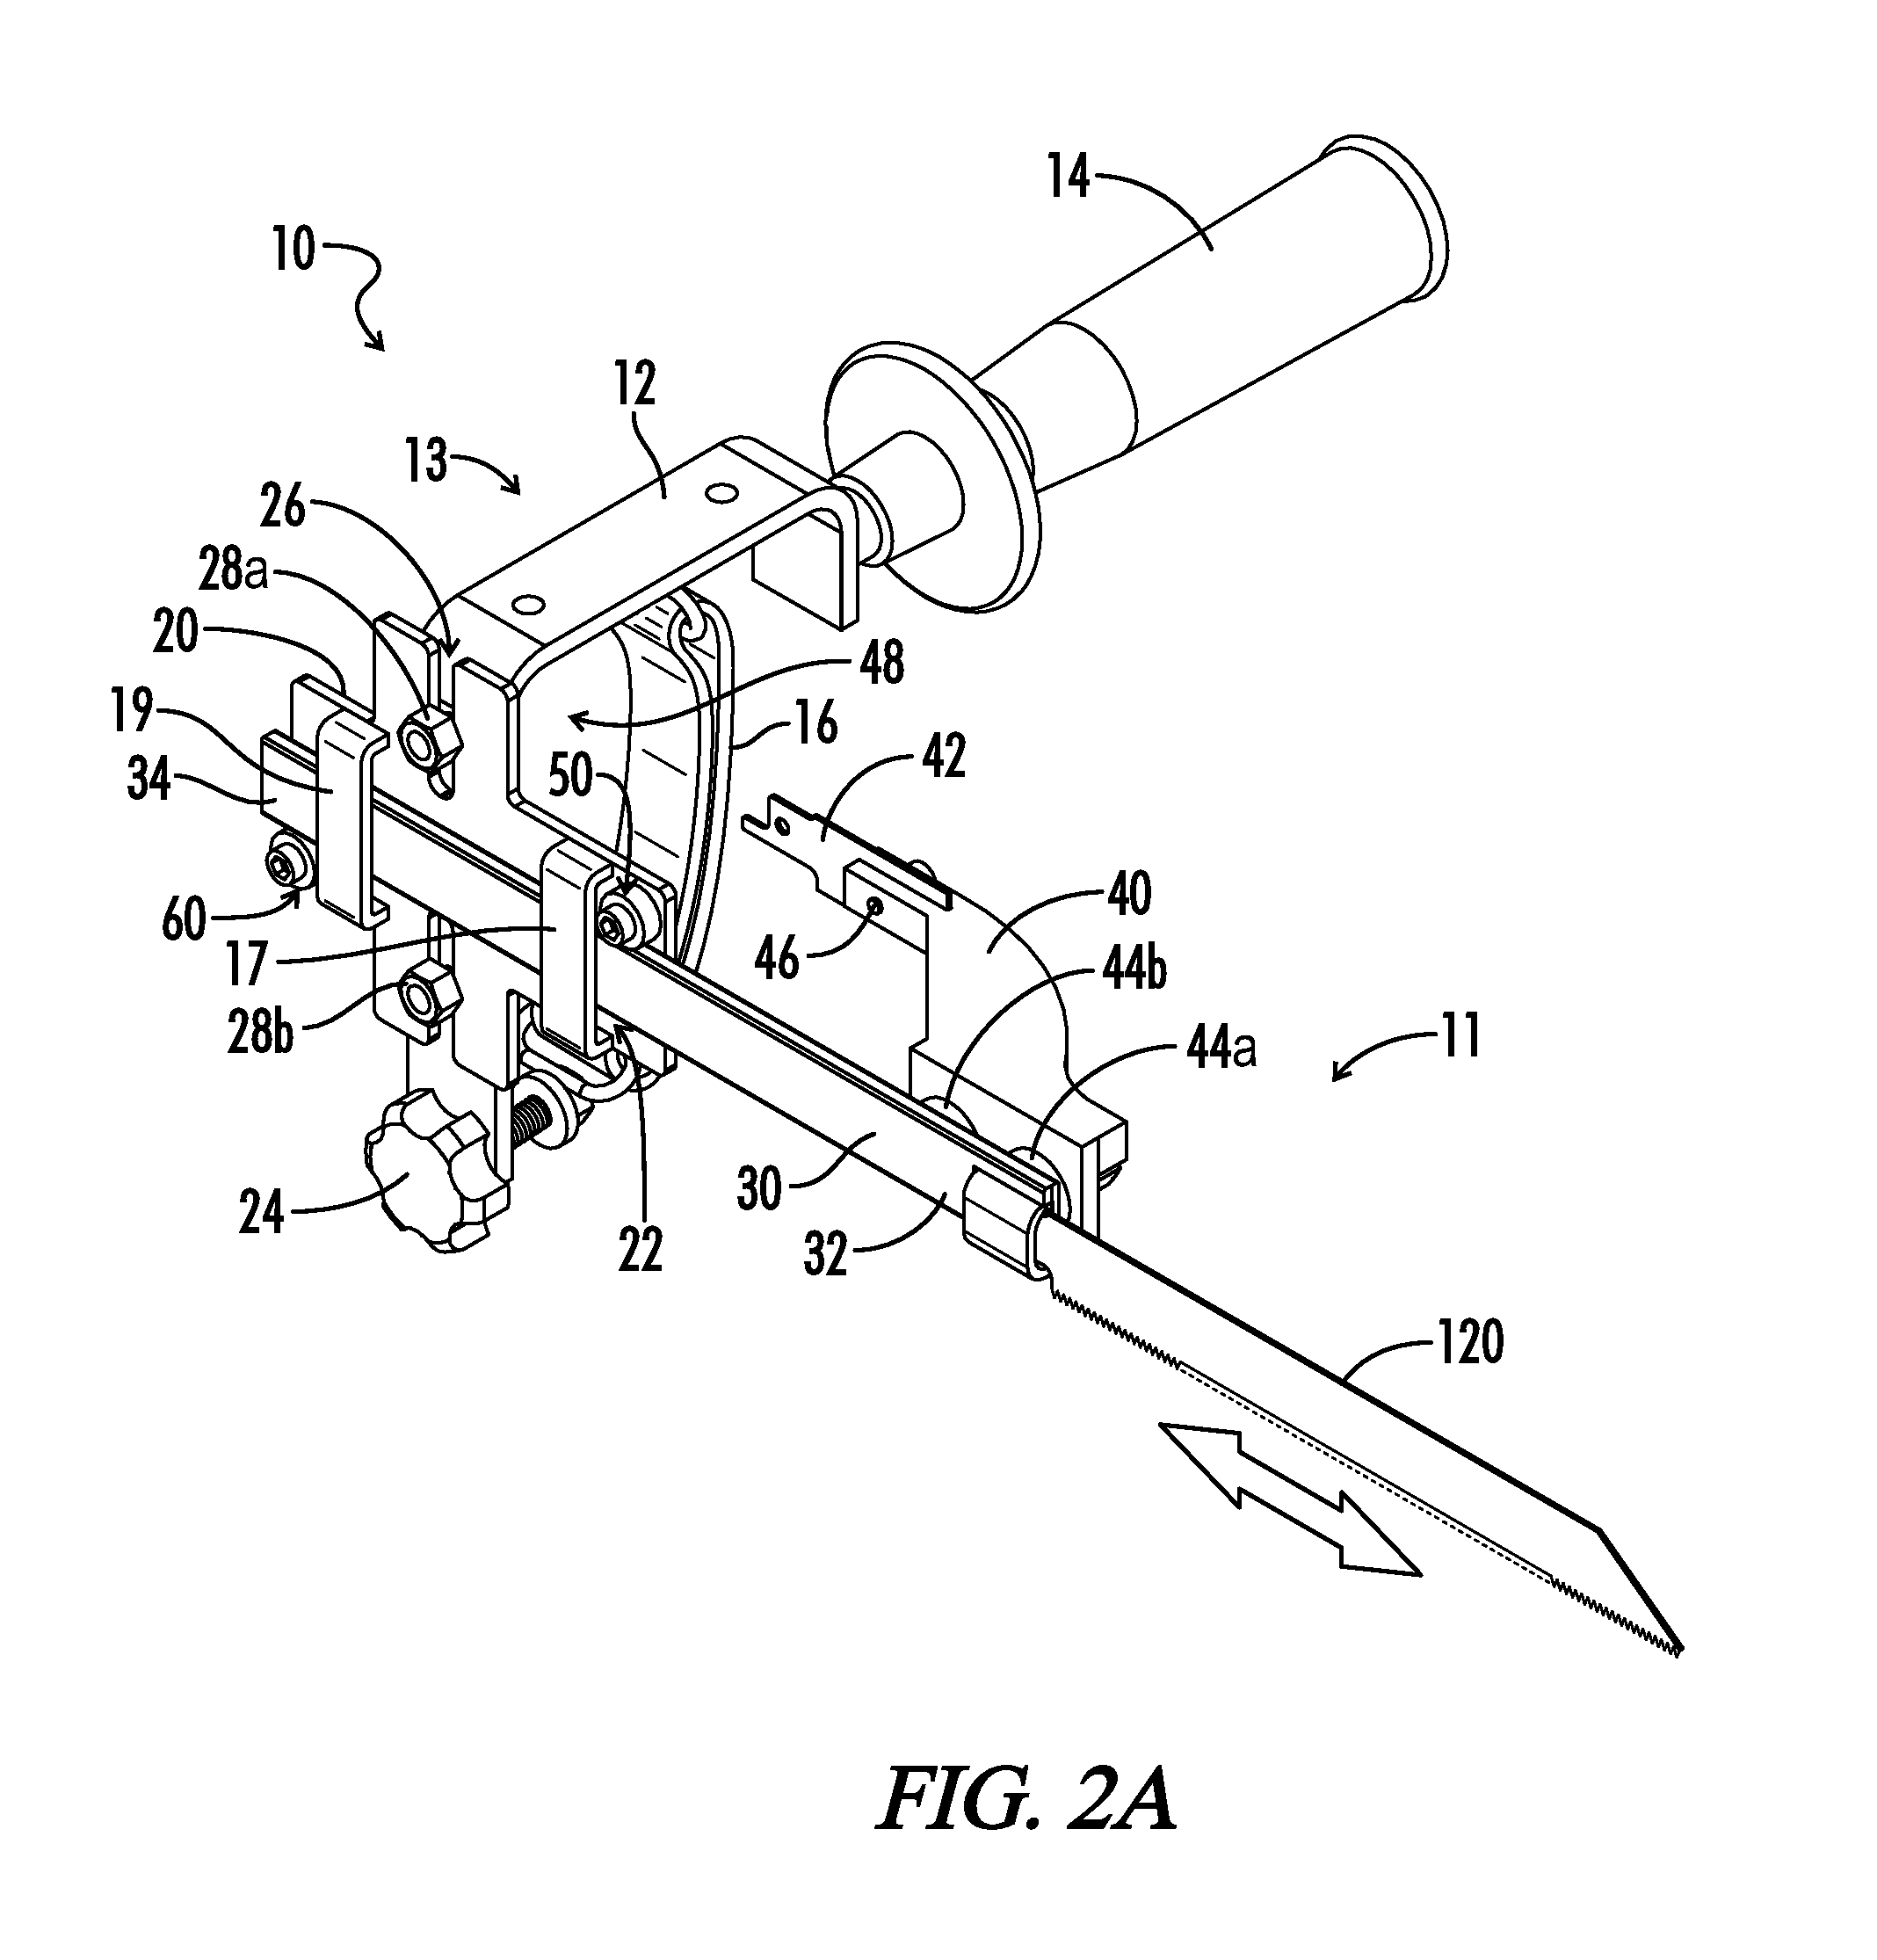 Reciprocating tool attachment assembly and methods